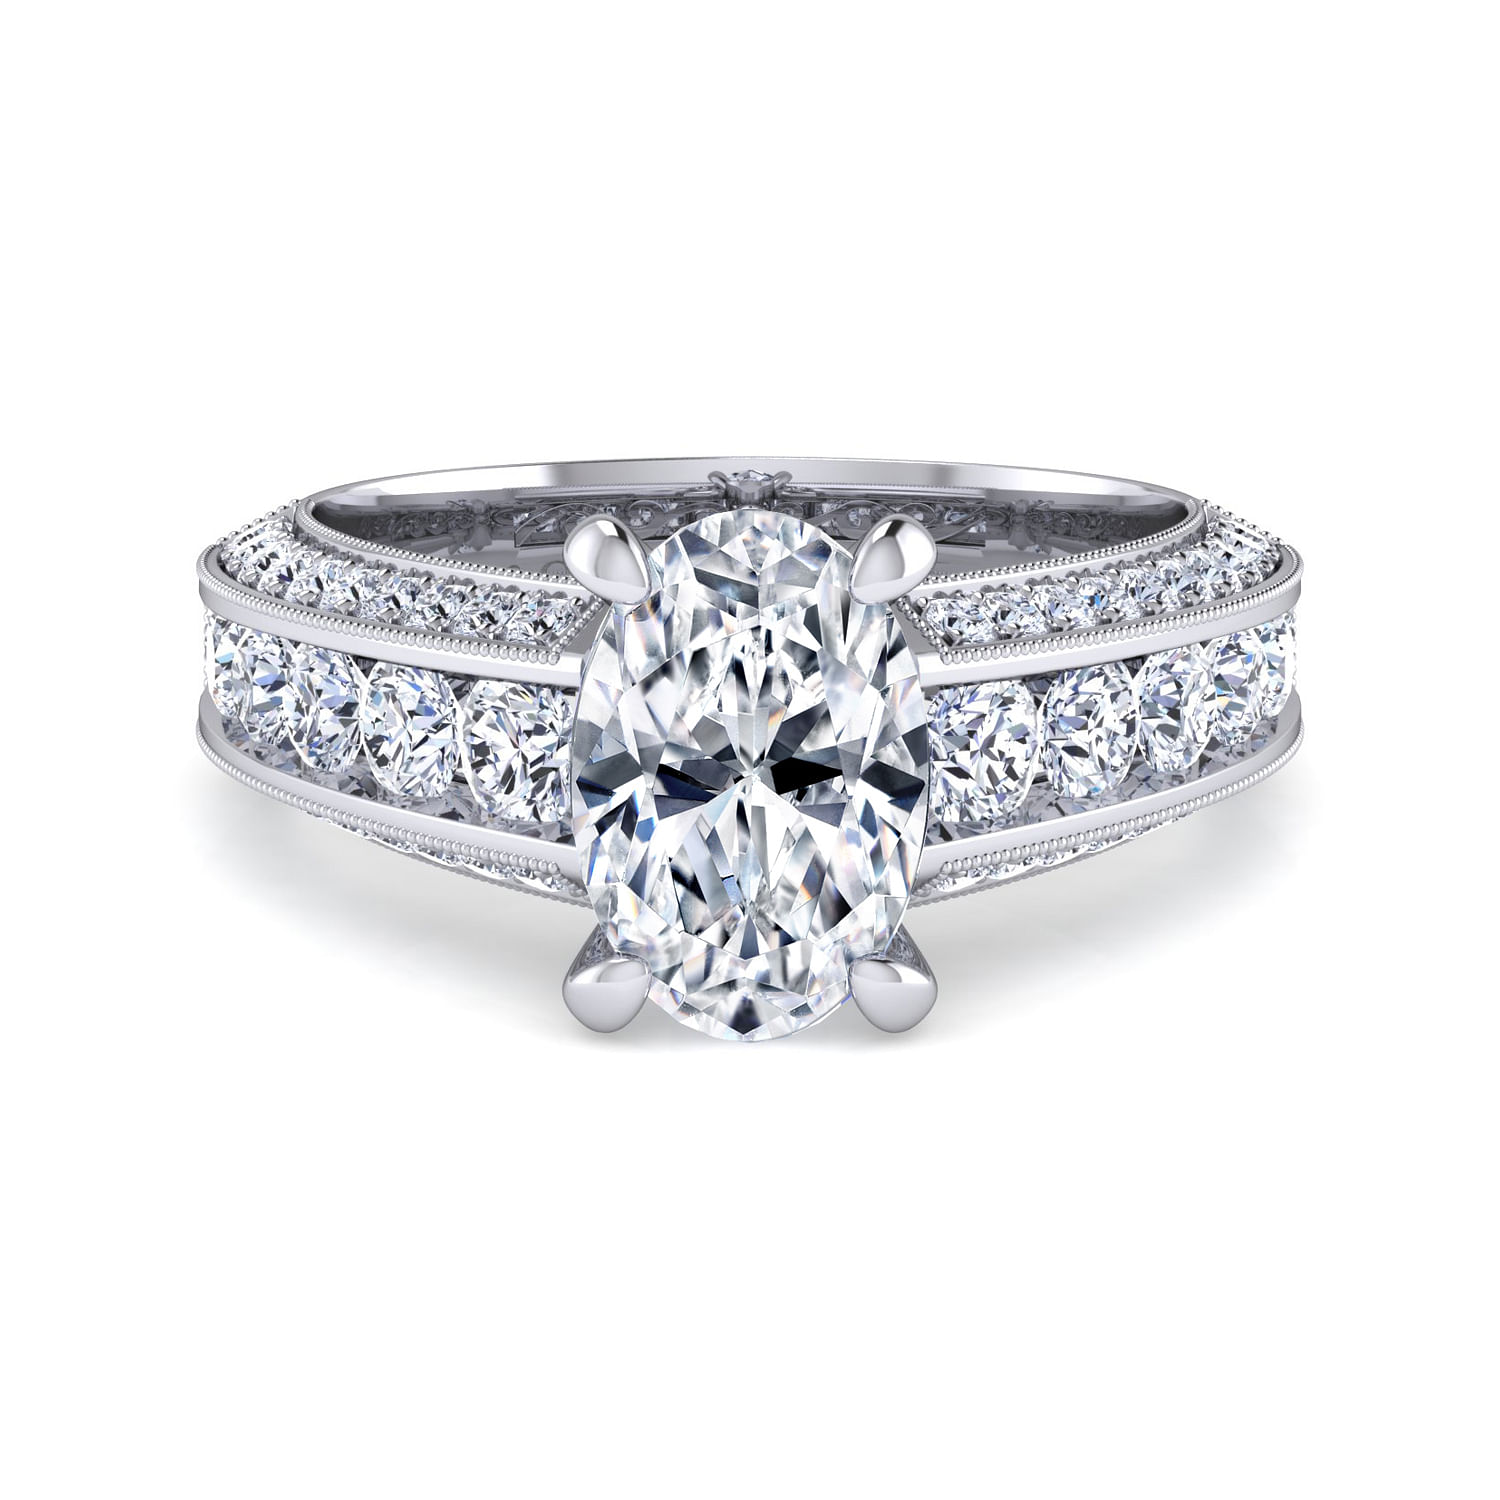 Gabriel - Vintage Inspired 14K White Gold Wide Band Oval Diamond Channel Set Engagement Ring